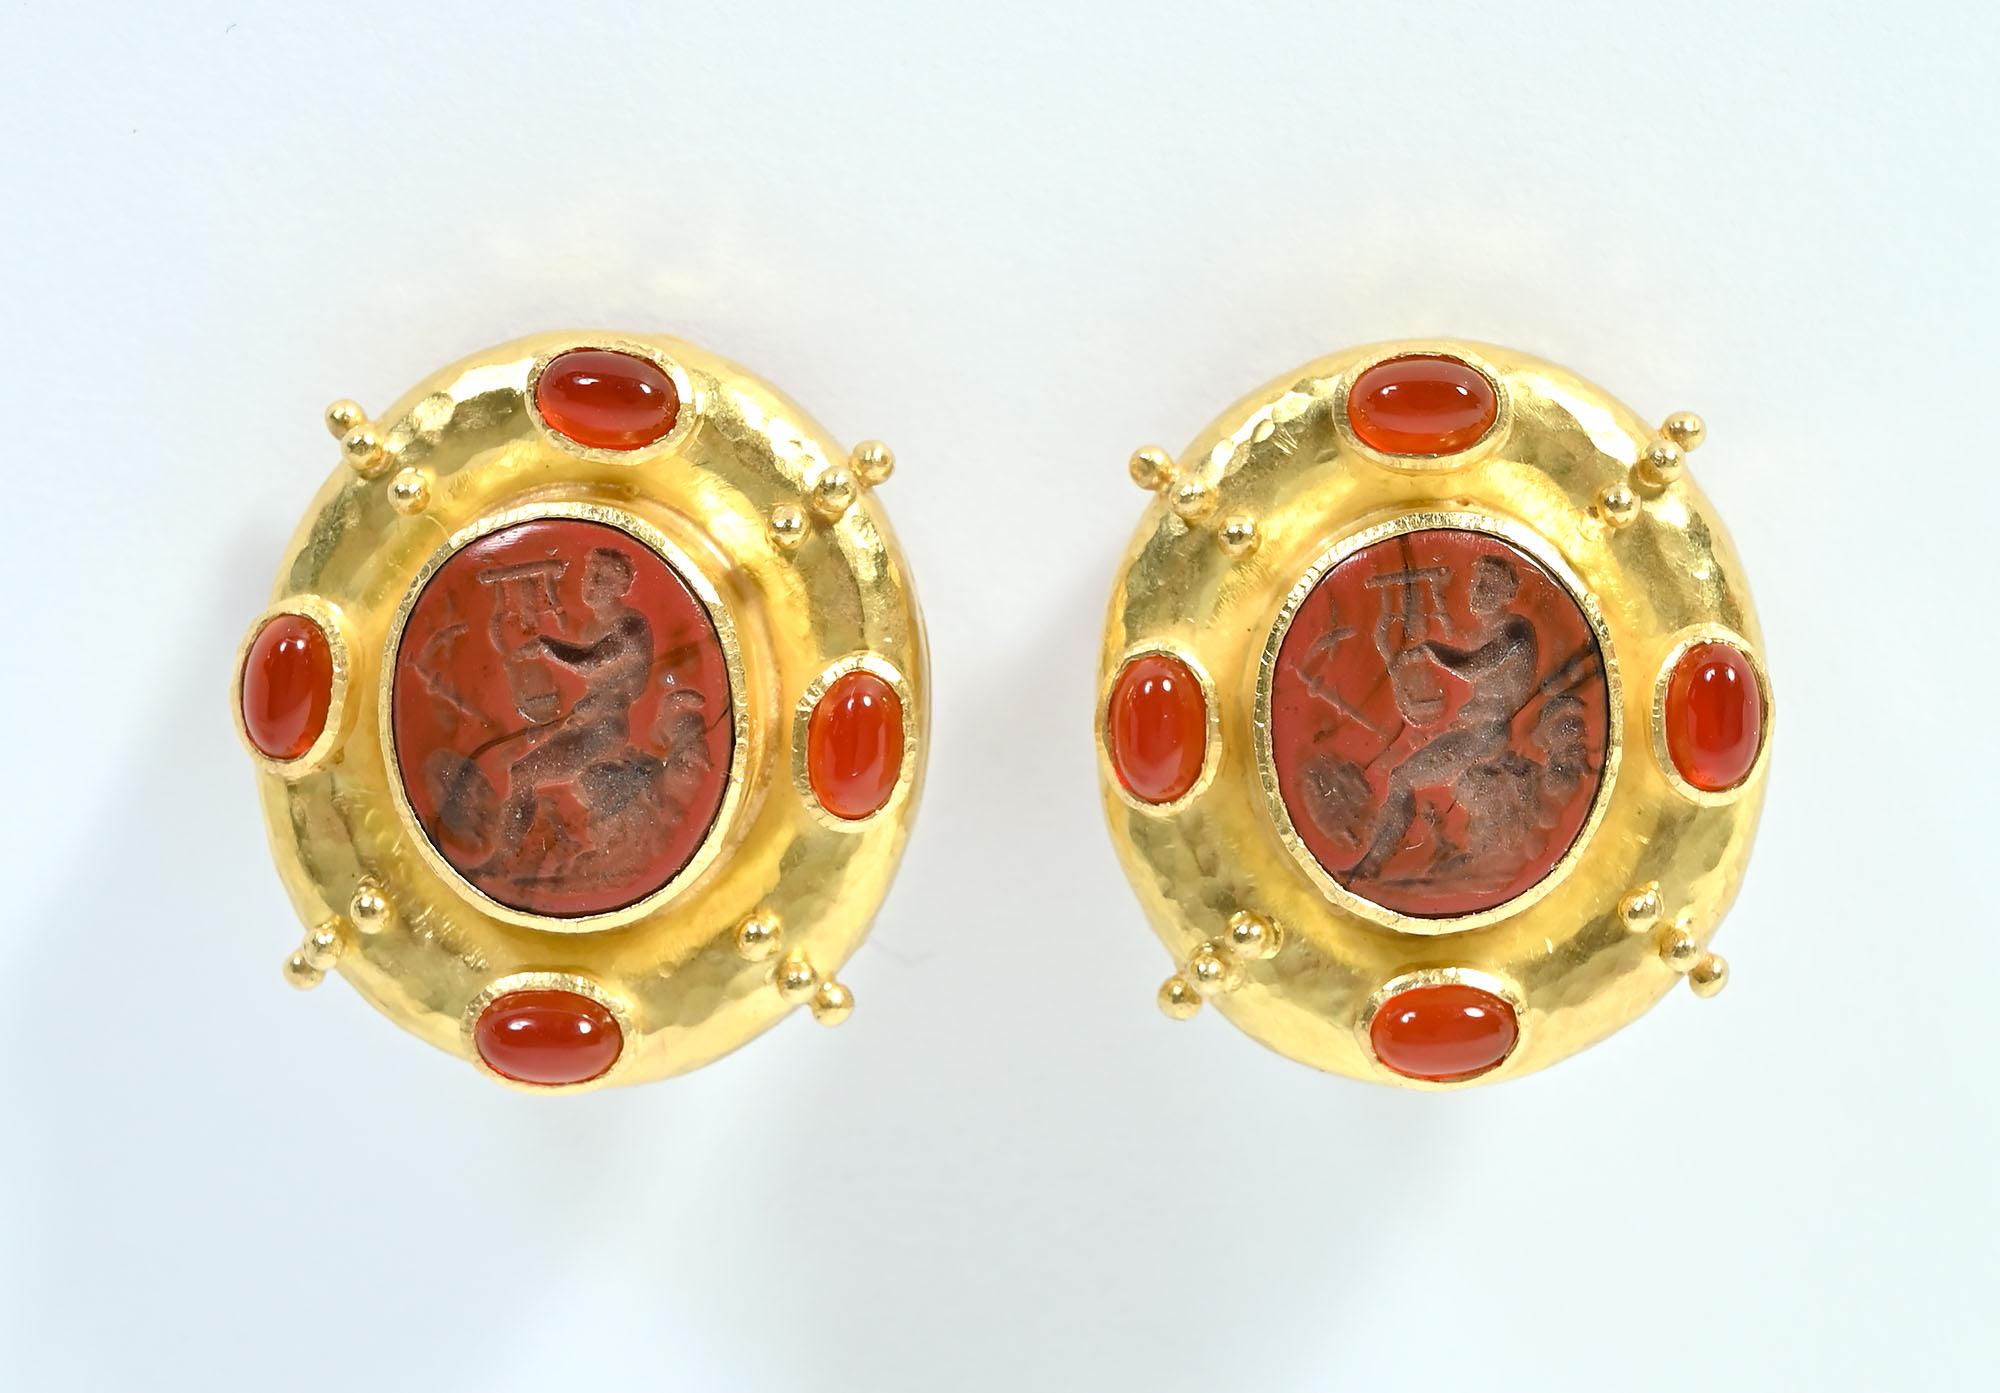 Large, bold earrings by Elizabeth  Locke. The central oval of jasper depicts a man in profile playing a musical instrument, Around the center medallion are four cabochon carnelians, Four groups of small gold balls are set at an angle between the